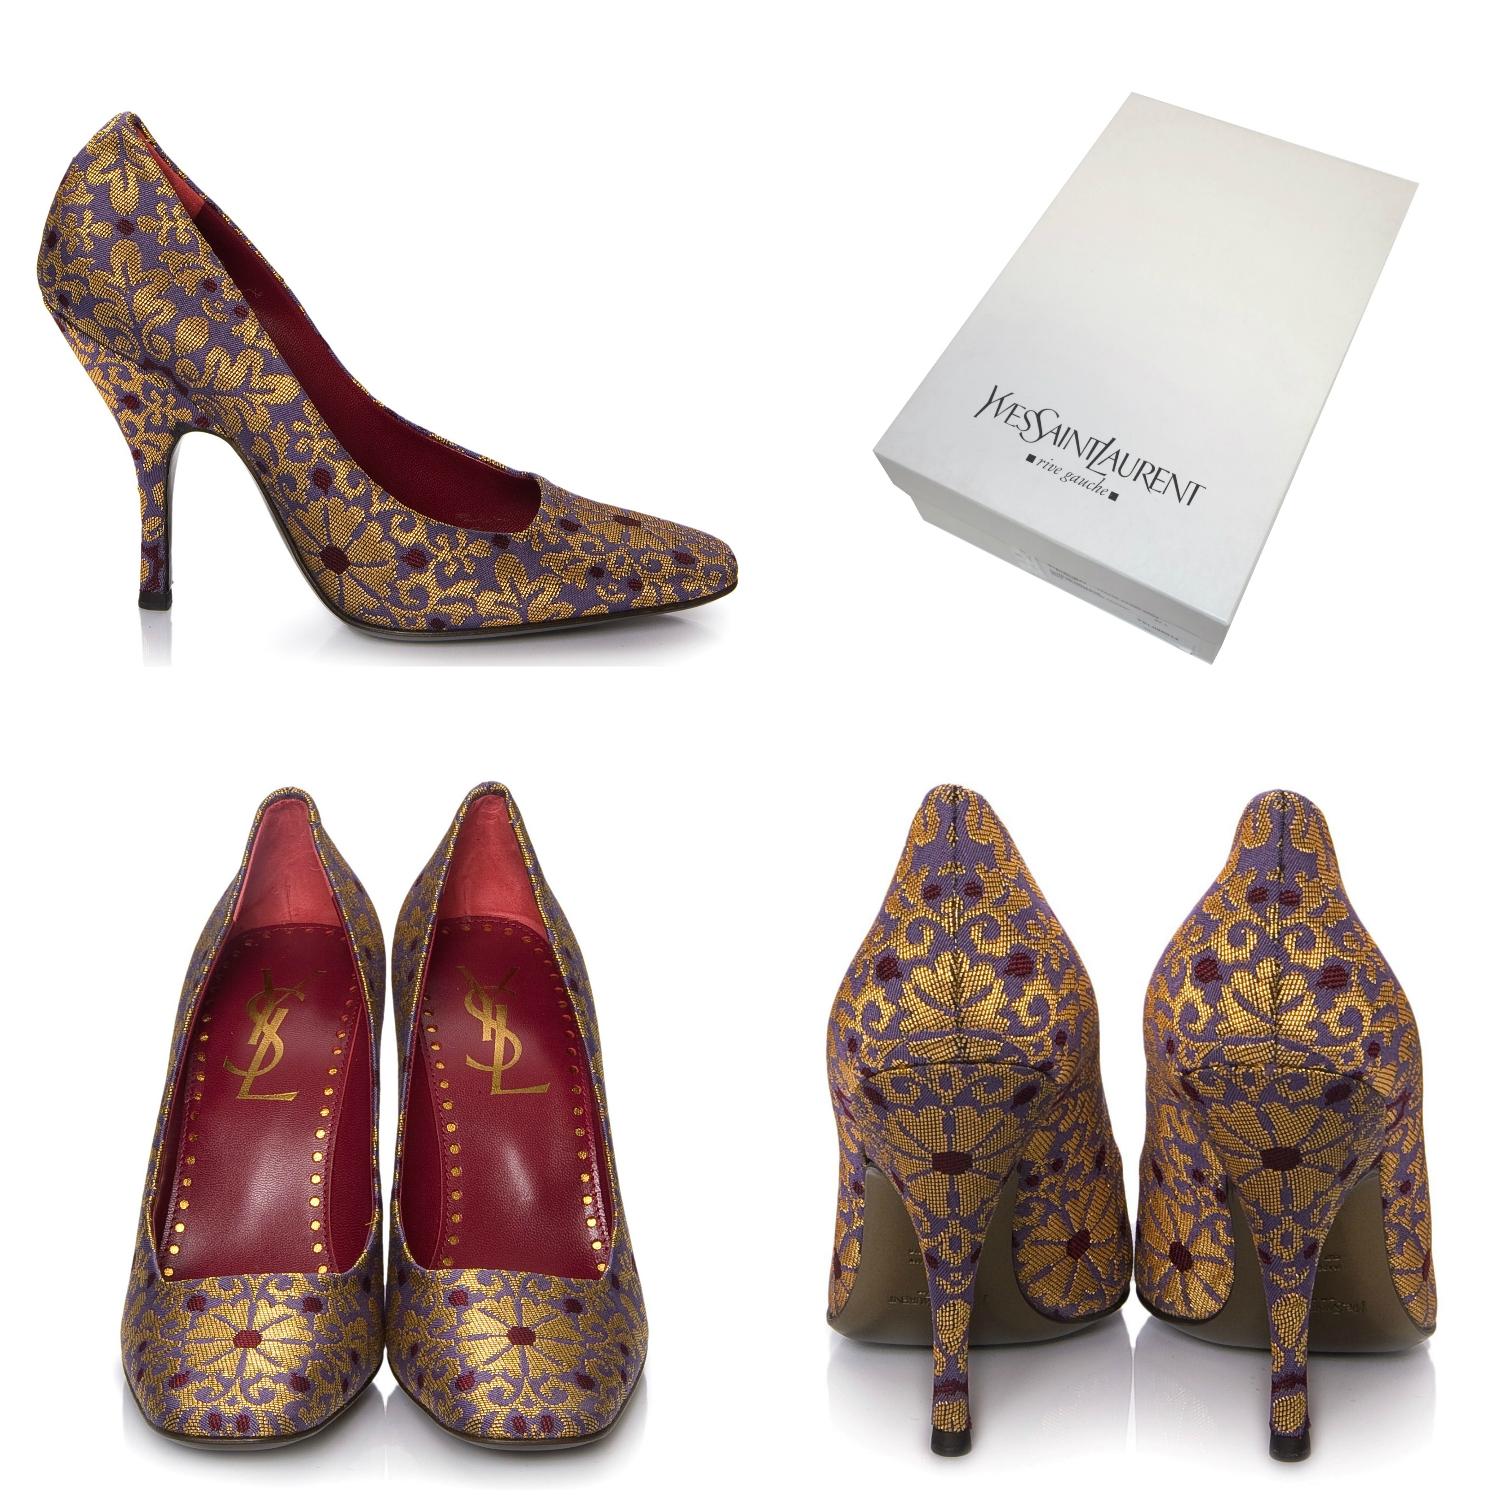 Tom Ford For YSL Heels
Brand New
* Stunning Brocade Heels
* Tom Ford's Final Years w/ YSL
* Red Interior
* Purples and Golds
* Leather Insole 
* Pointed Toe 
* 4